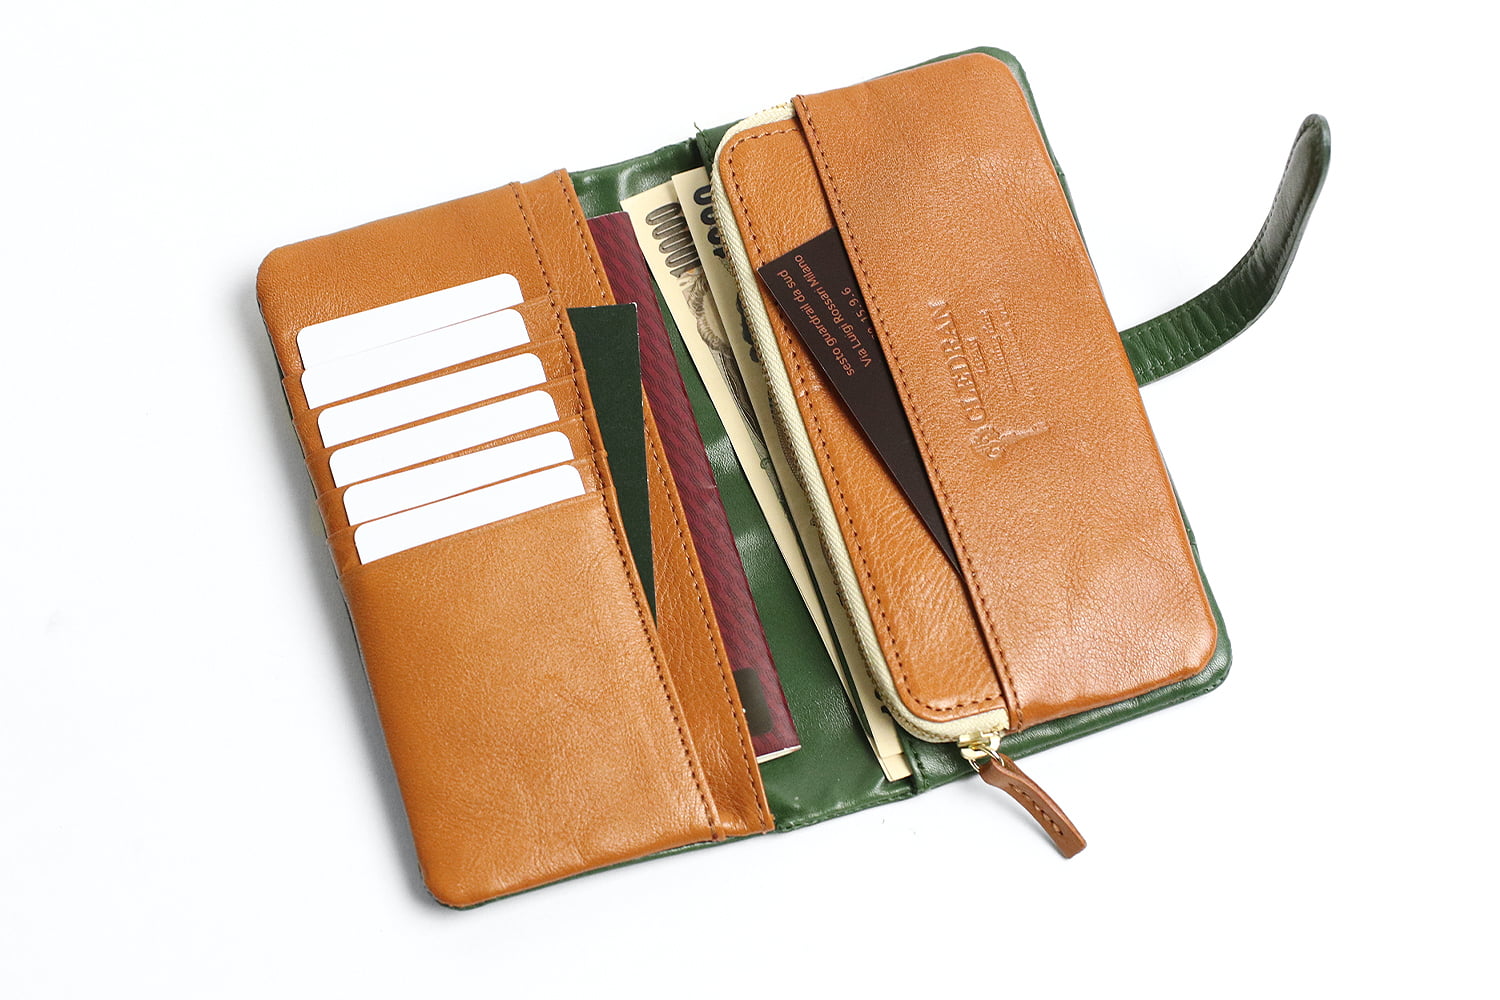 CLEDRAN Adre Plump form Functional long wallet made of cowhide leather 